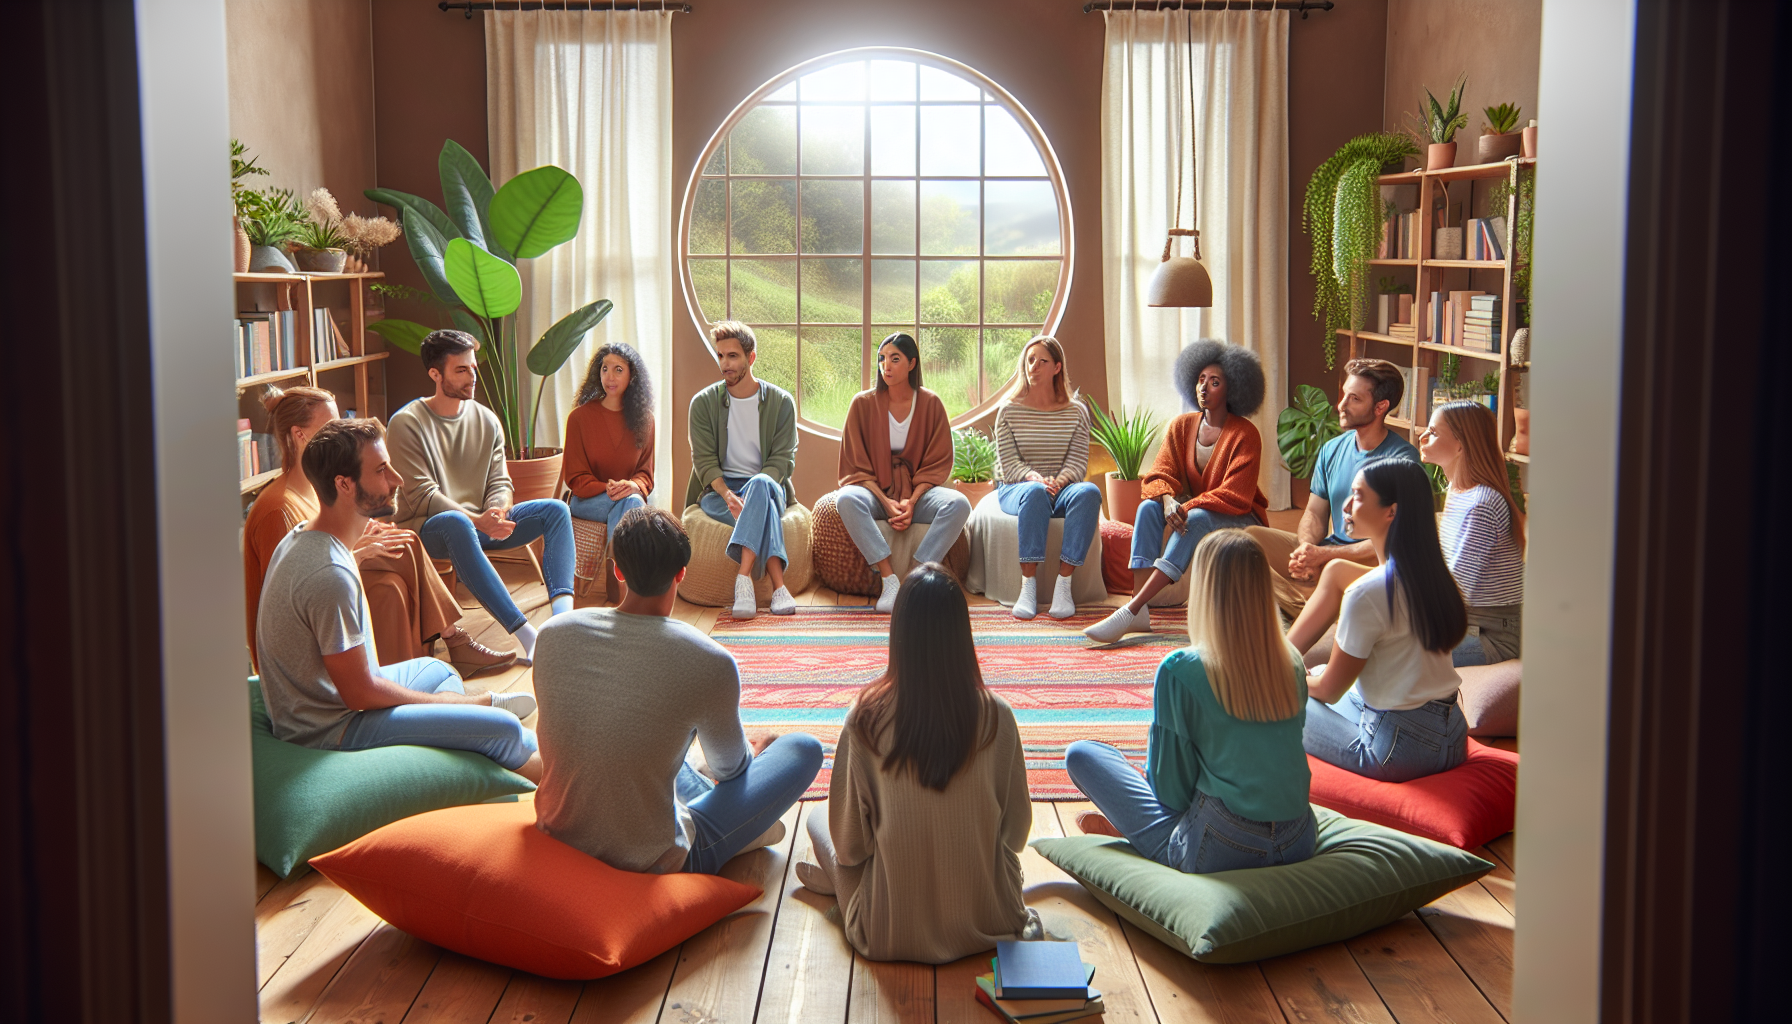 Illustration of a group of people in a circle, representing a therapeutic community